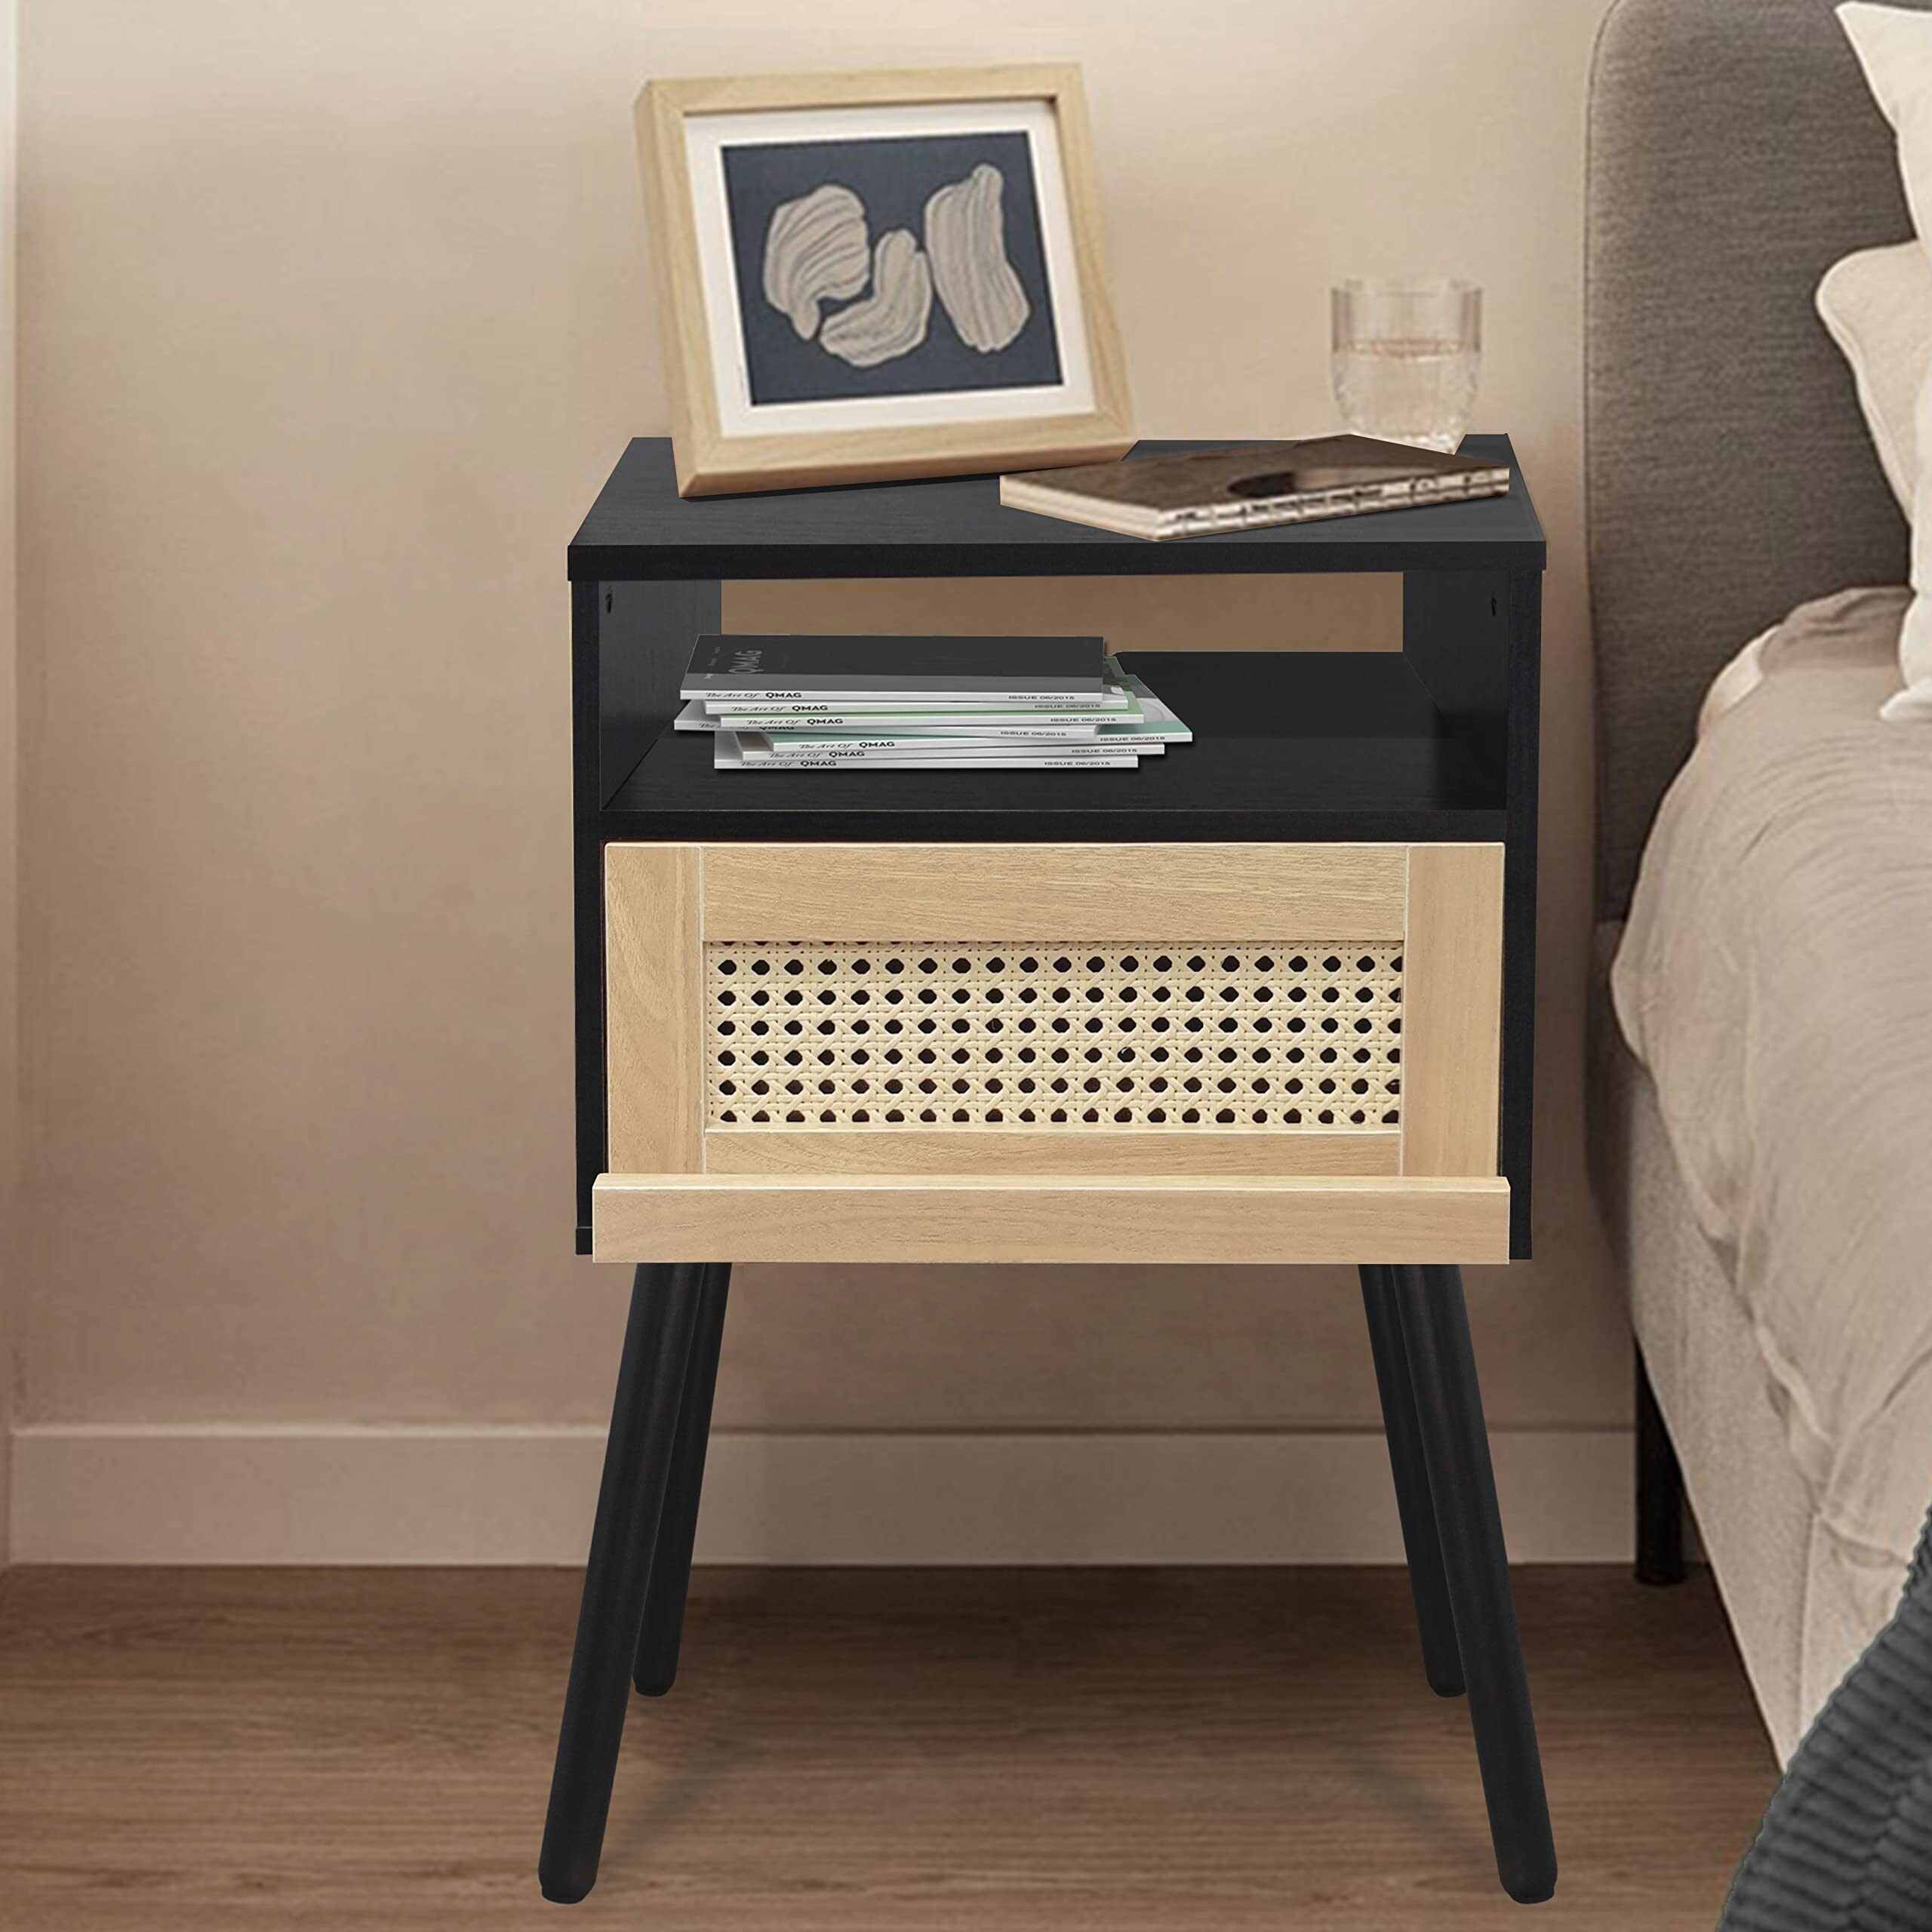 https://ak1.ostkcdn.com/images/products/is/images/direct/088adc6c1d5afc1701078831e3bfa43f7f17cd61/Nightstand-with-Drawer%2C-Cable-Management%2C-Rattan-Side-End-Table-with-Storage%2C-Bedside-Table-for-Bedroom%2C-Living-Room.jpg